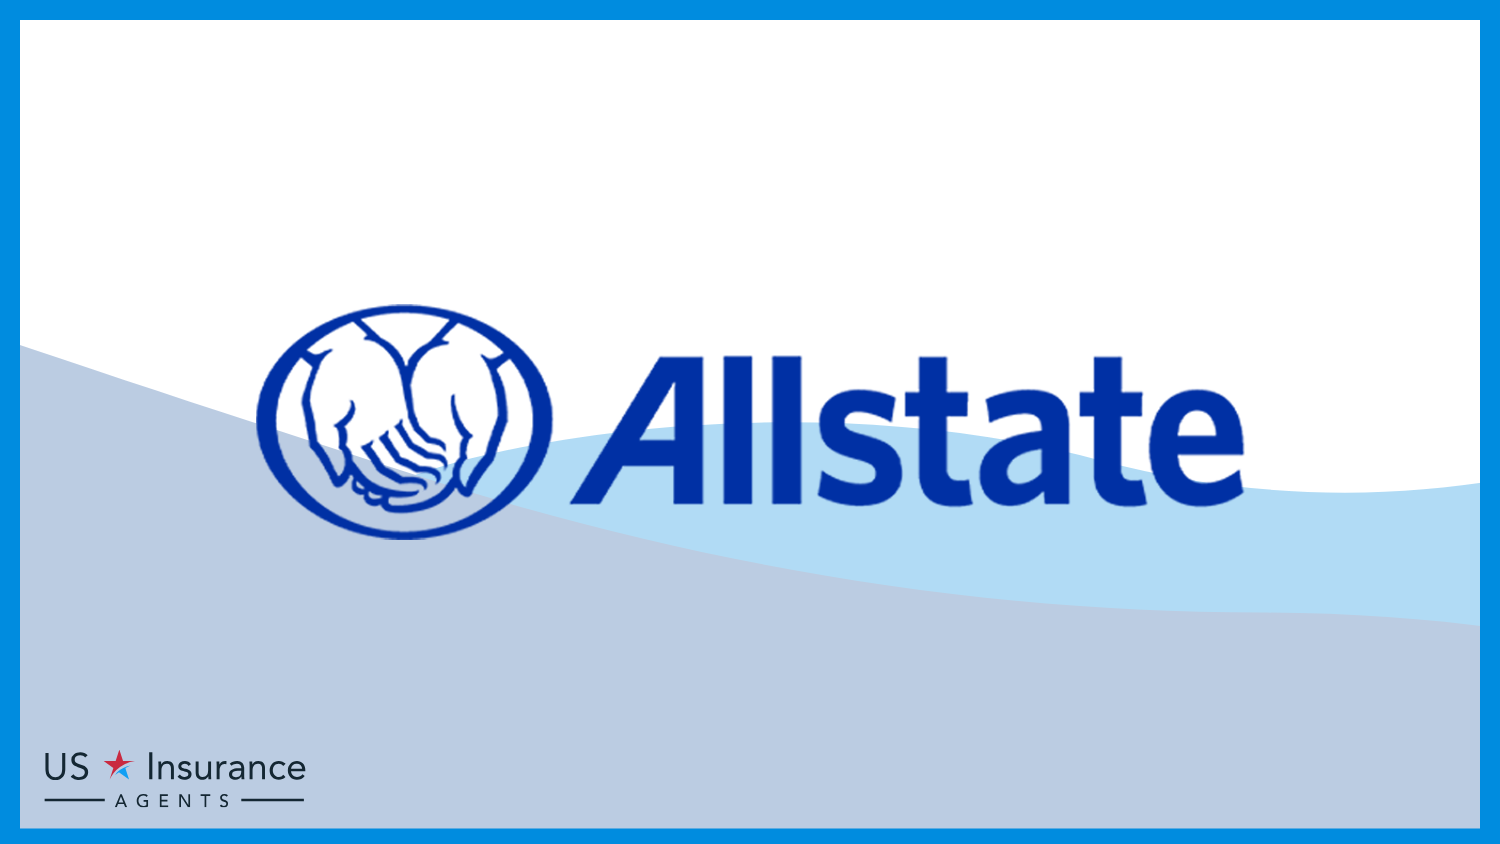 Allstate: Best Car Insurance for People With Bad Credit